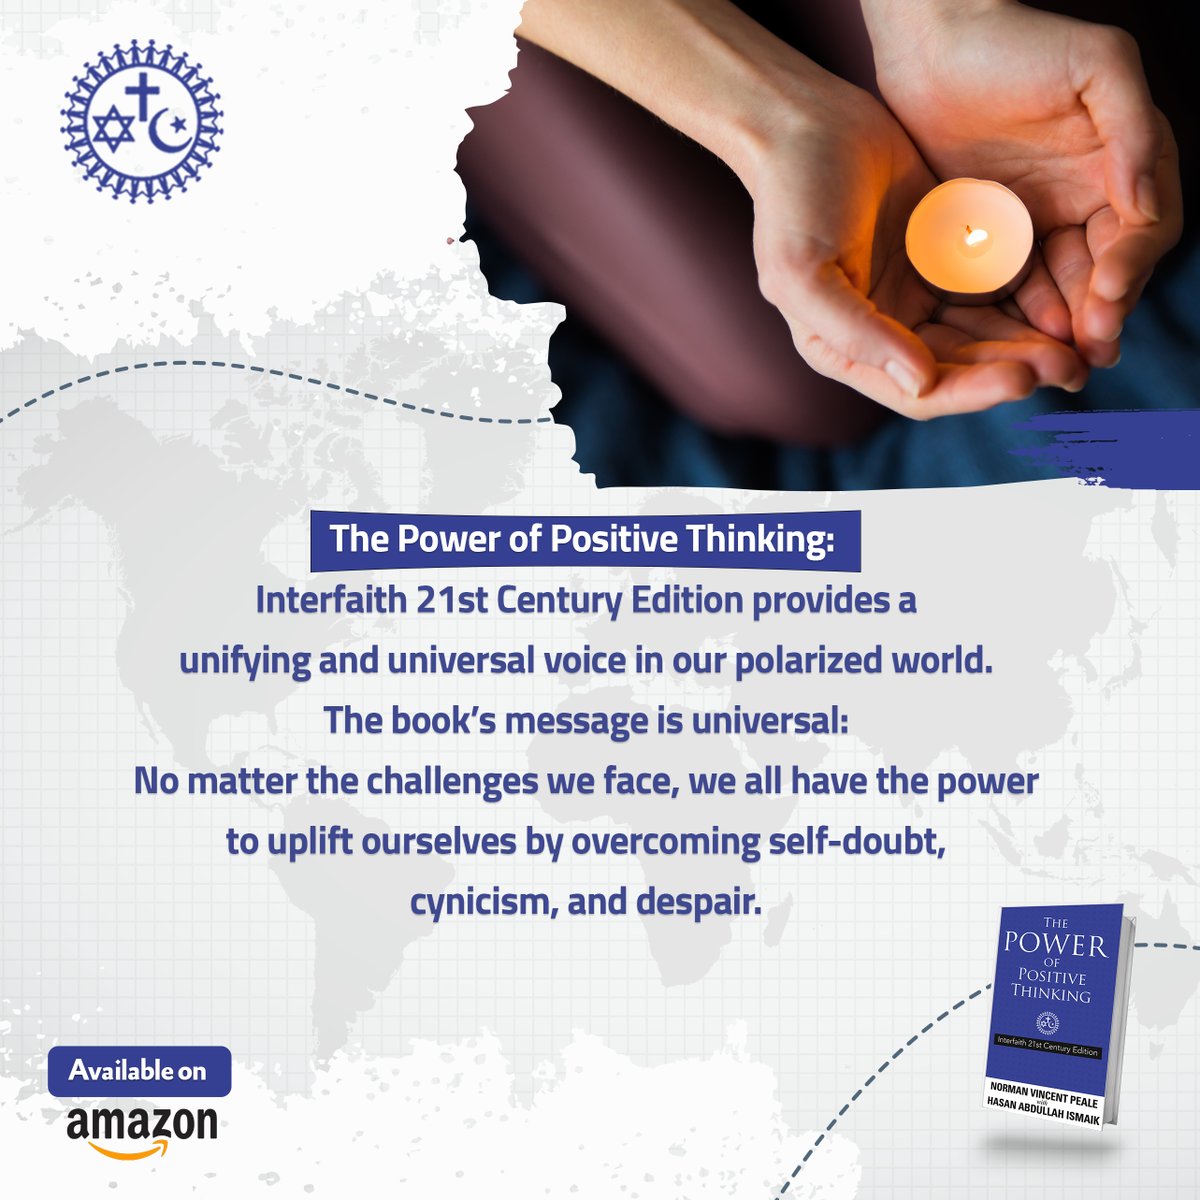 Our heavenly books tell us that we all have enormous potential as human beings. 'The Power of Positive Thinking' reminds us of the amazing power of our minds.
Don't hesitate to order your copy now from #Amazon 👉: amzn.to/3ek46TI

#NormanVincentPeale - #HasanIsmaik -…